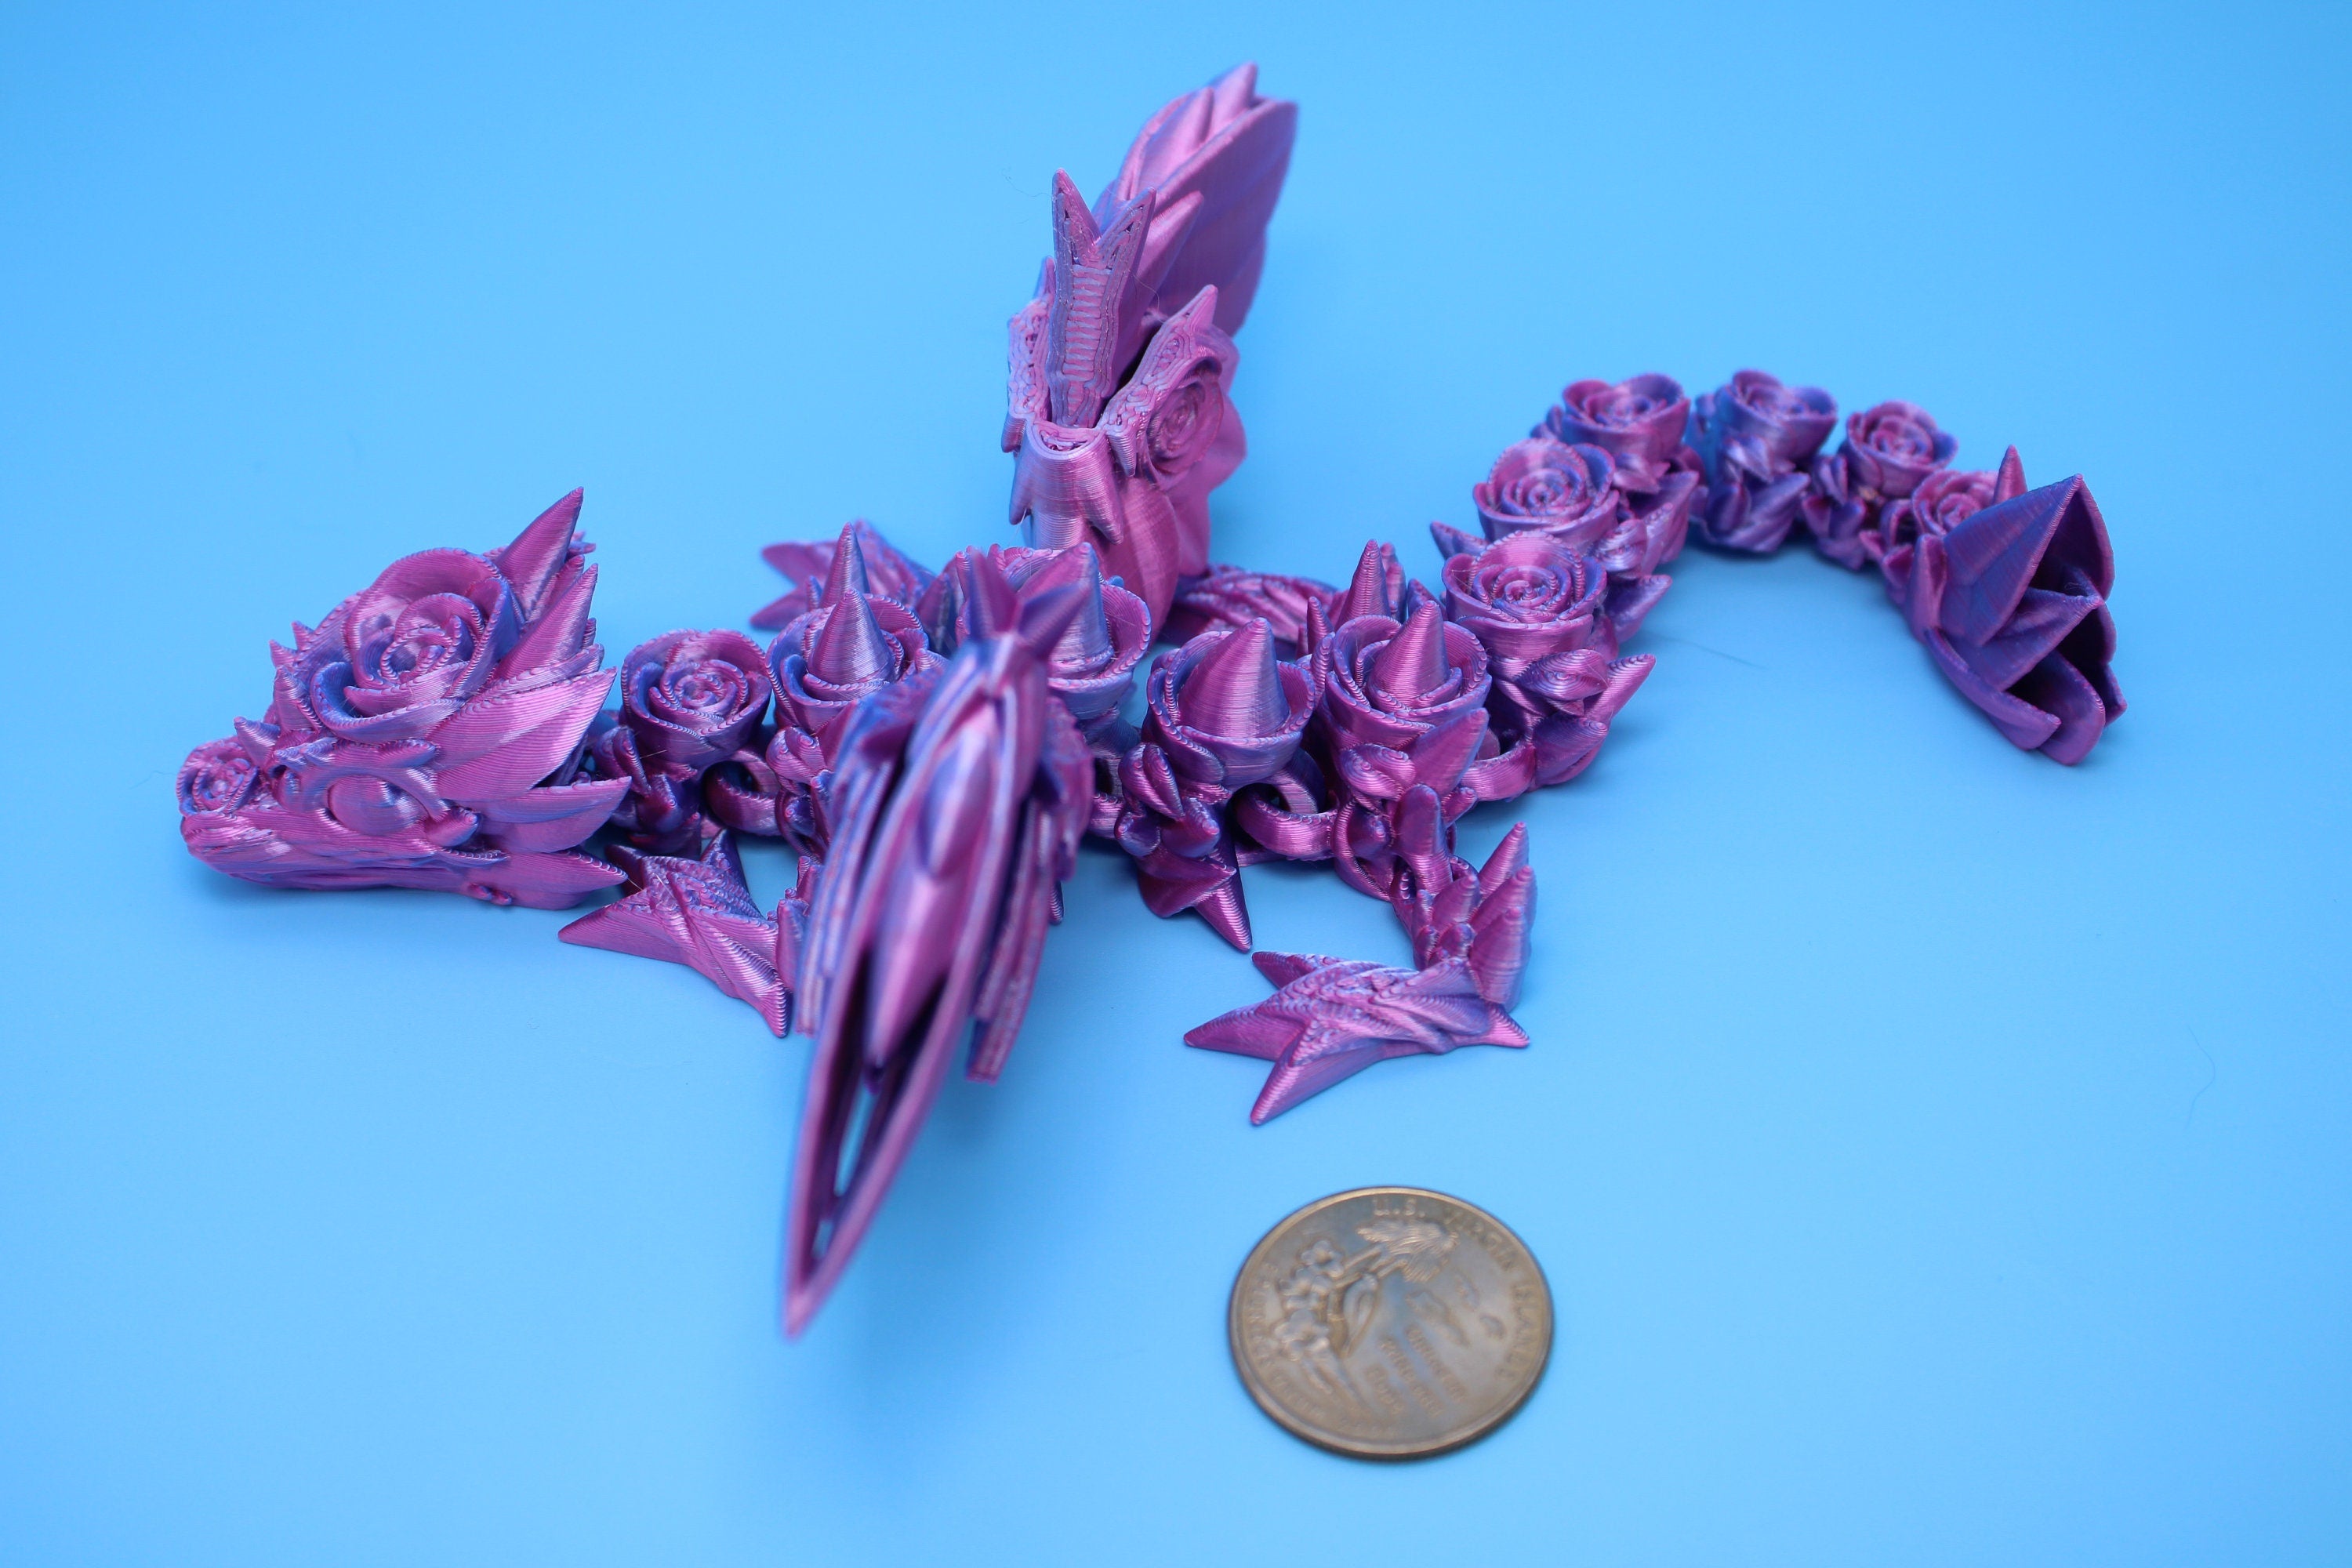 Baby Rose Wing Dragon | Blue / Pink | 3D Printed | Fidget | Flexi Toy 8.5 in. | Stress Relief Gift